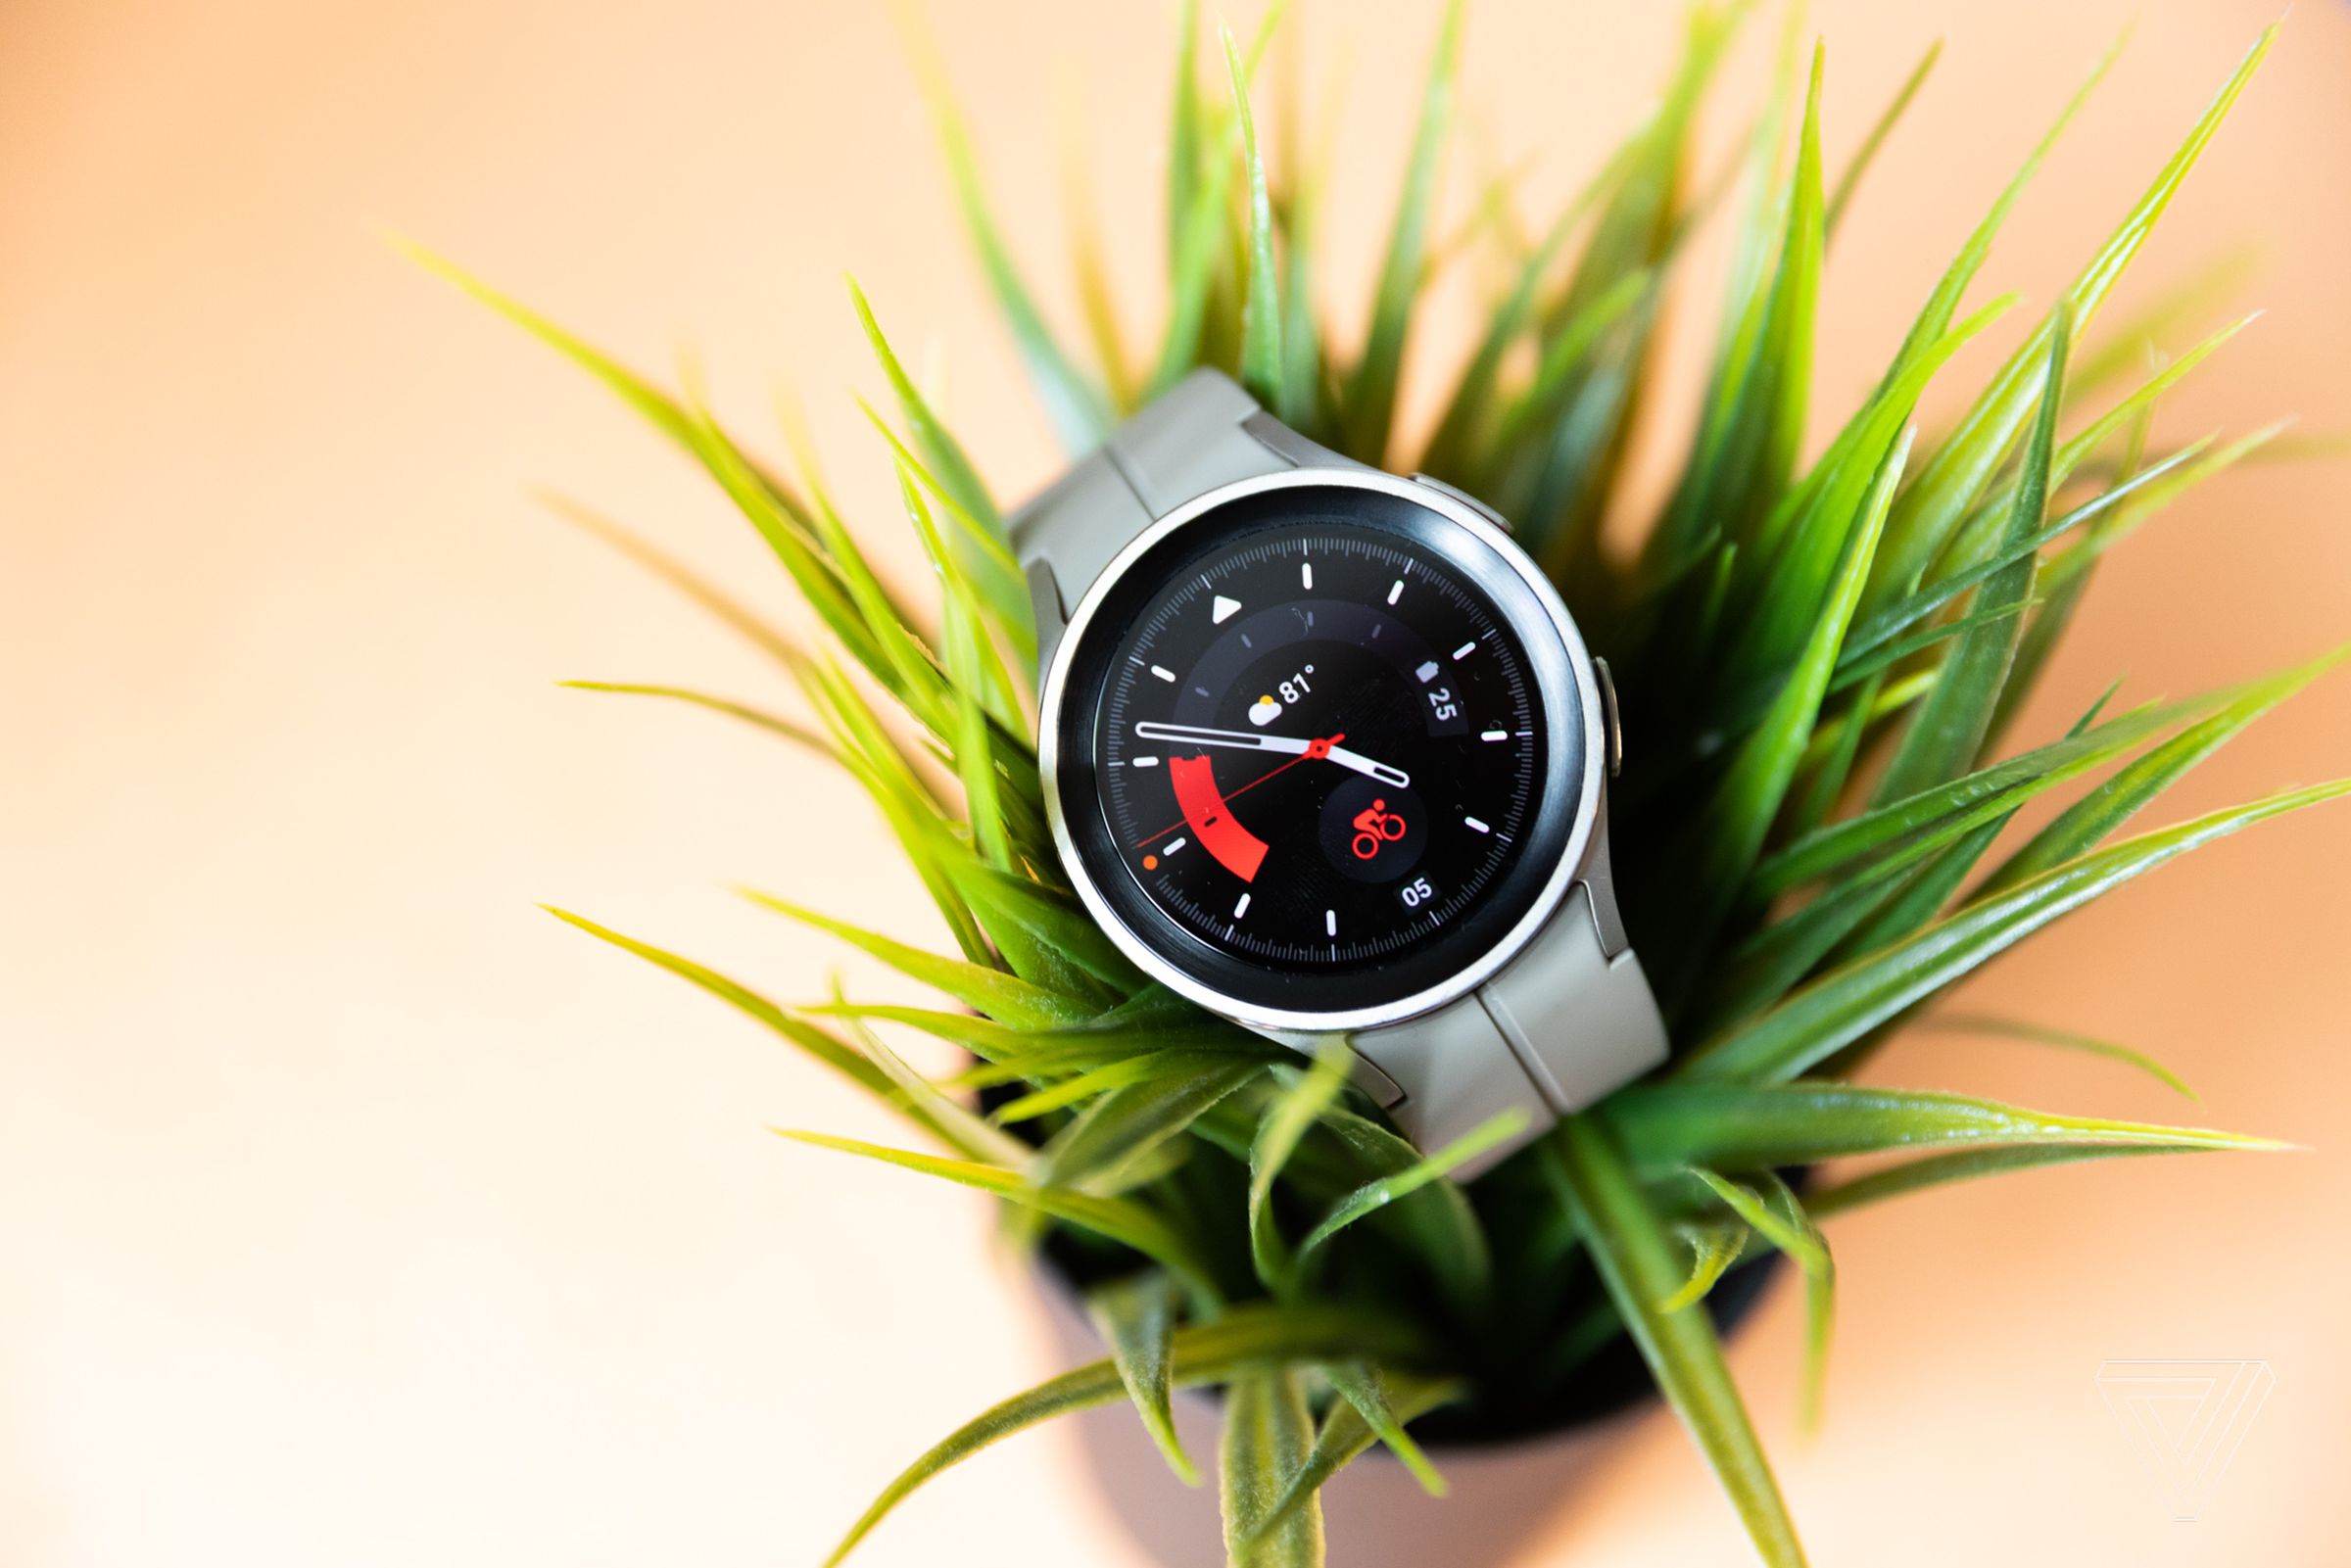 Pic of the Galaxy Watch 5 Pro on a plant